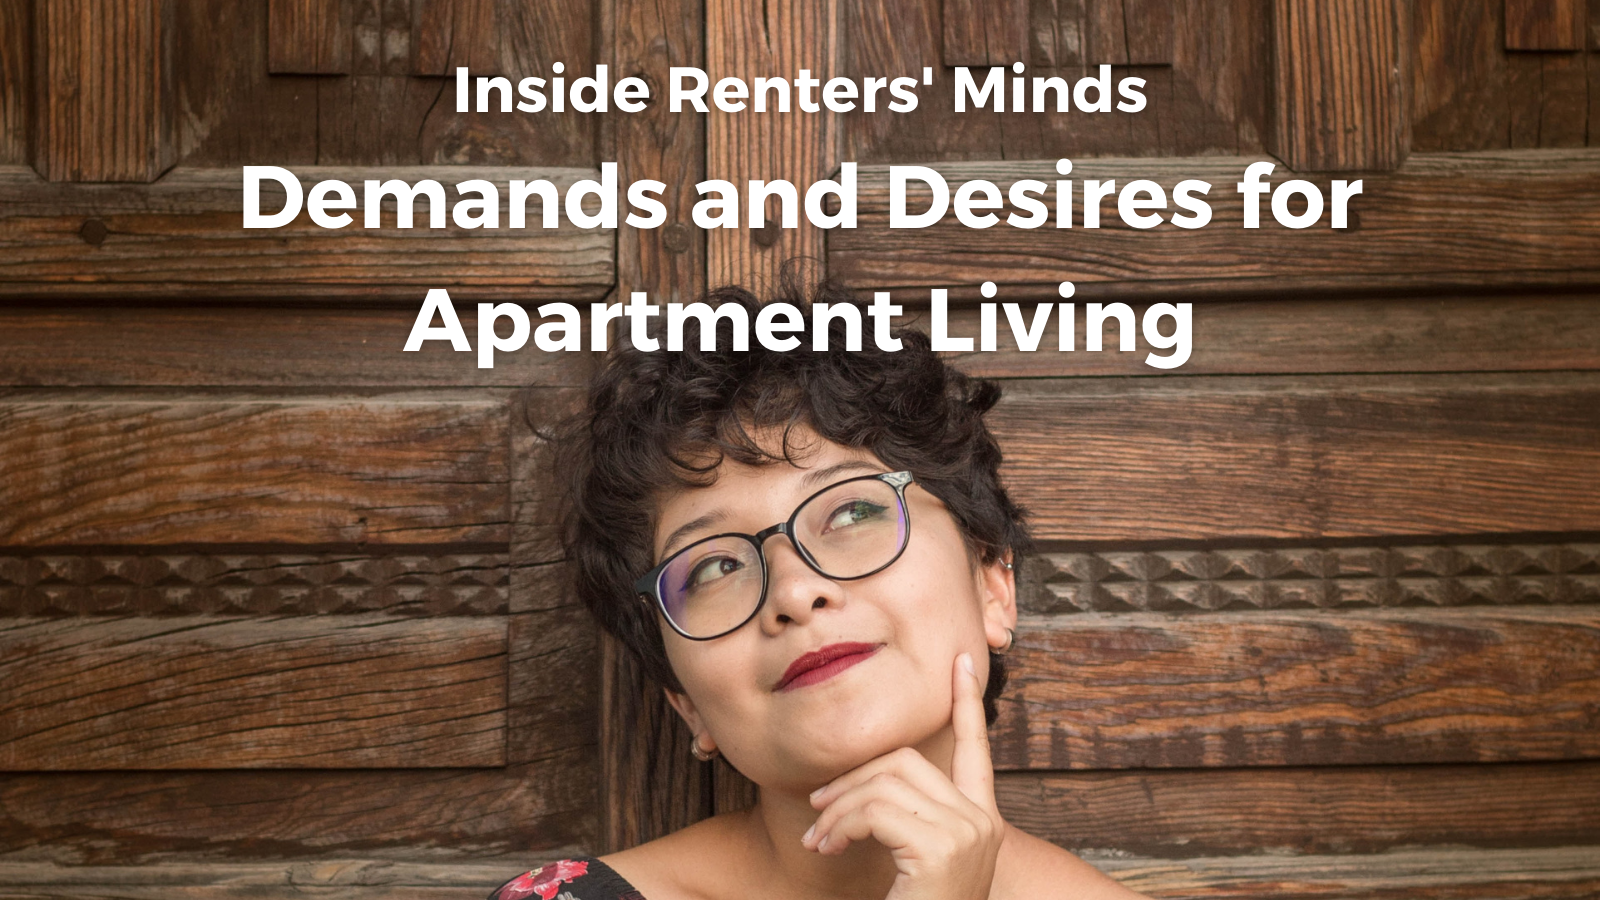 Inside Renters' Minds: Demands and Desires for Apartment Living